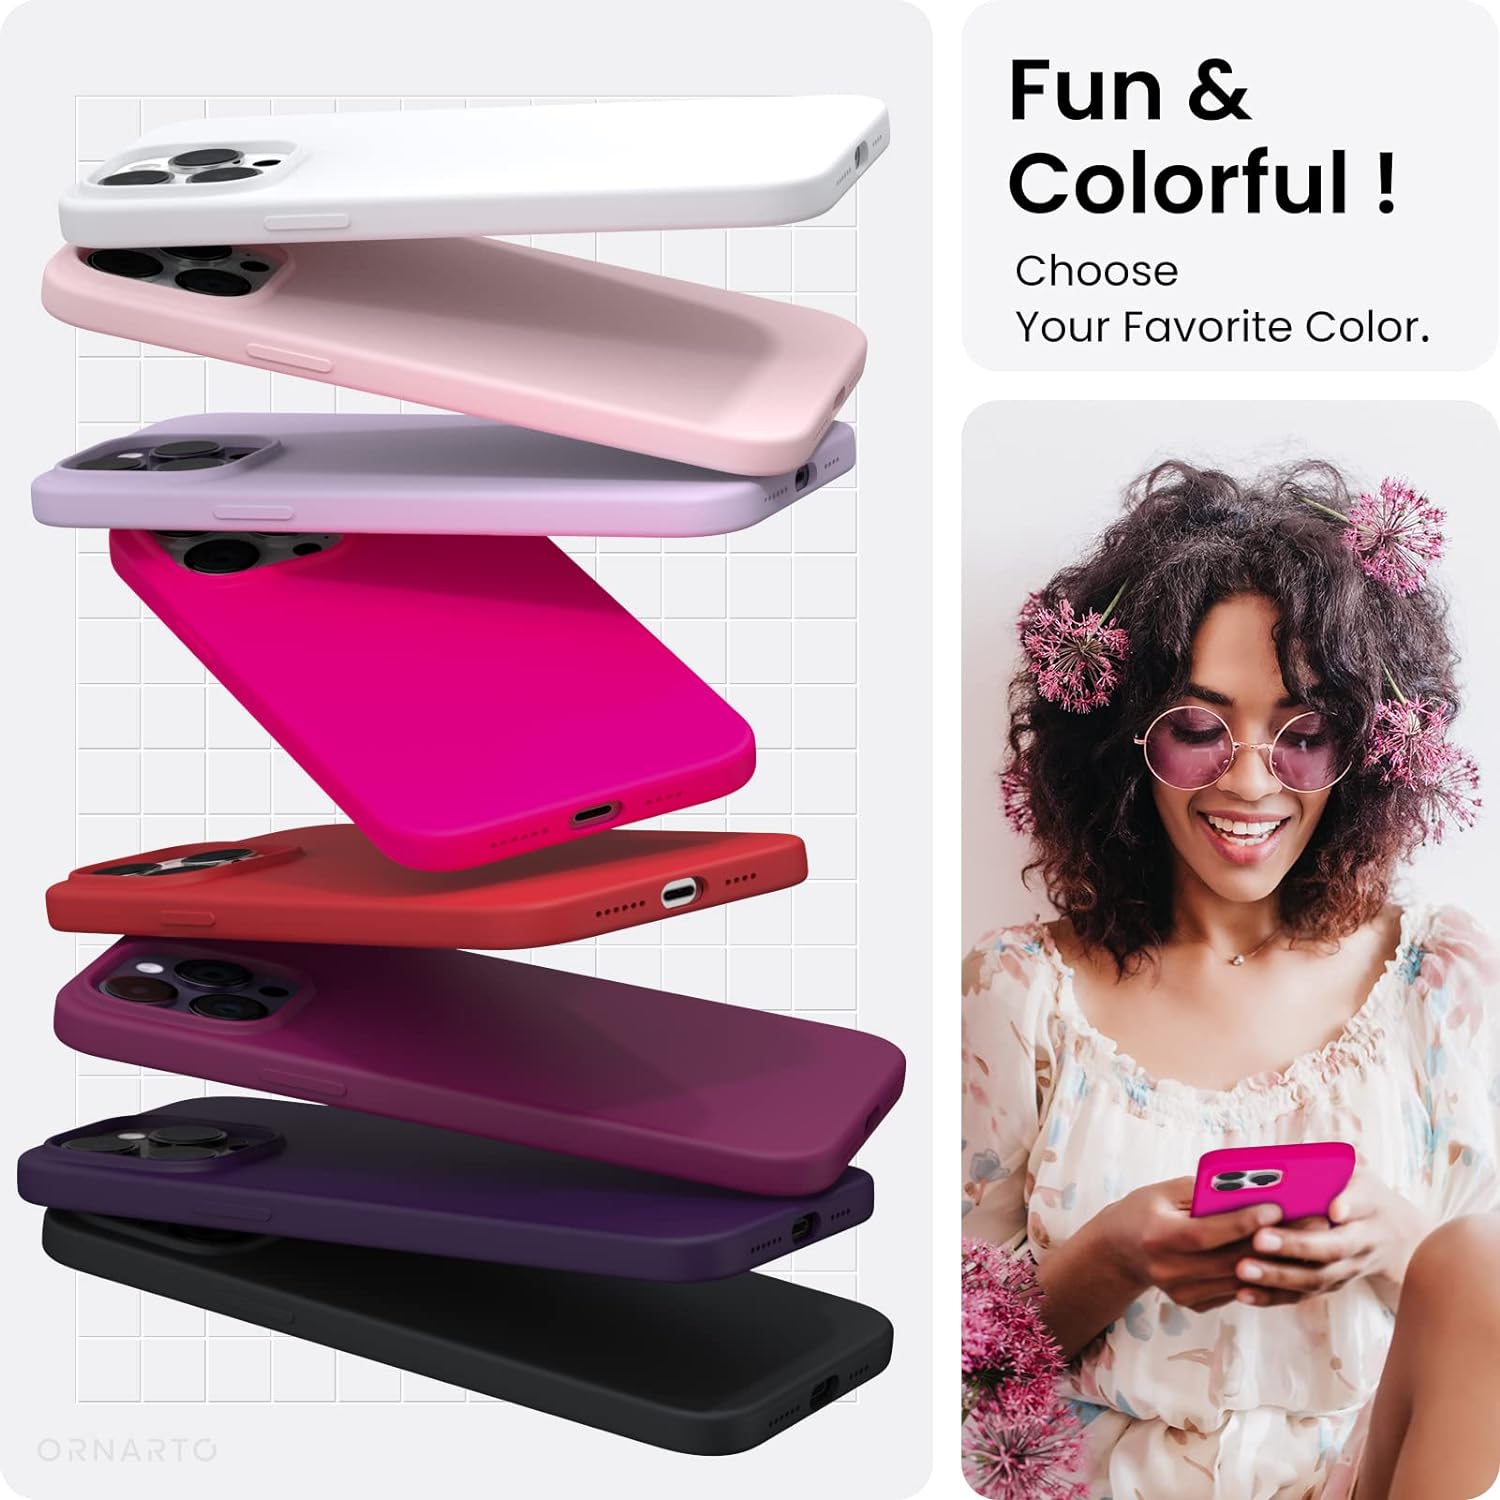 Ultra-Slim Soft Silicon Protective Matte Case for iPhone